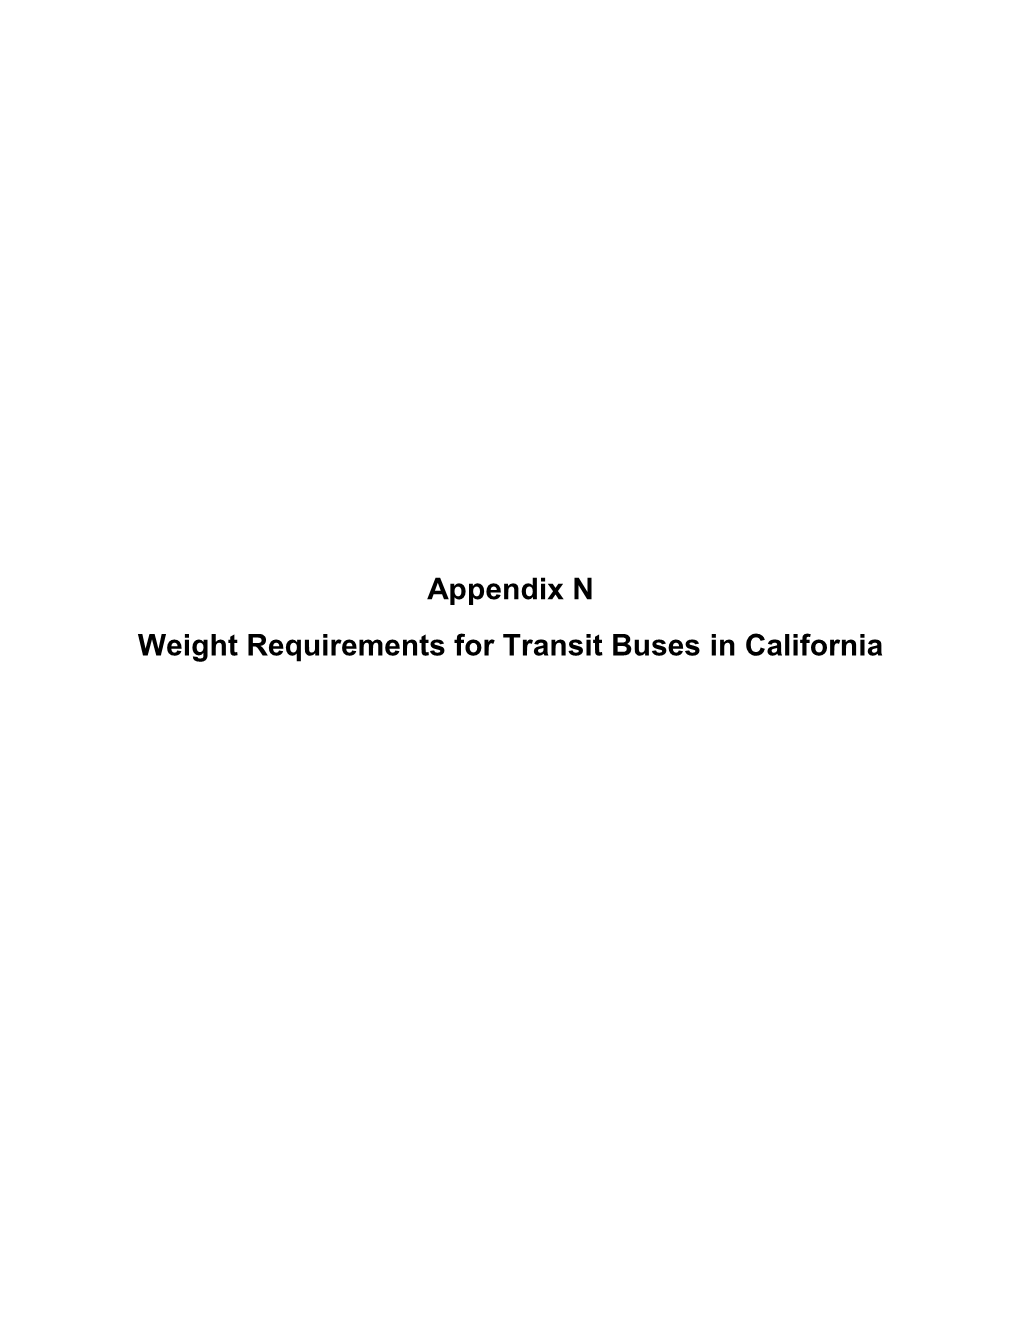 Appendix N Weight Requirements for Transit Buses in California